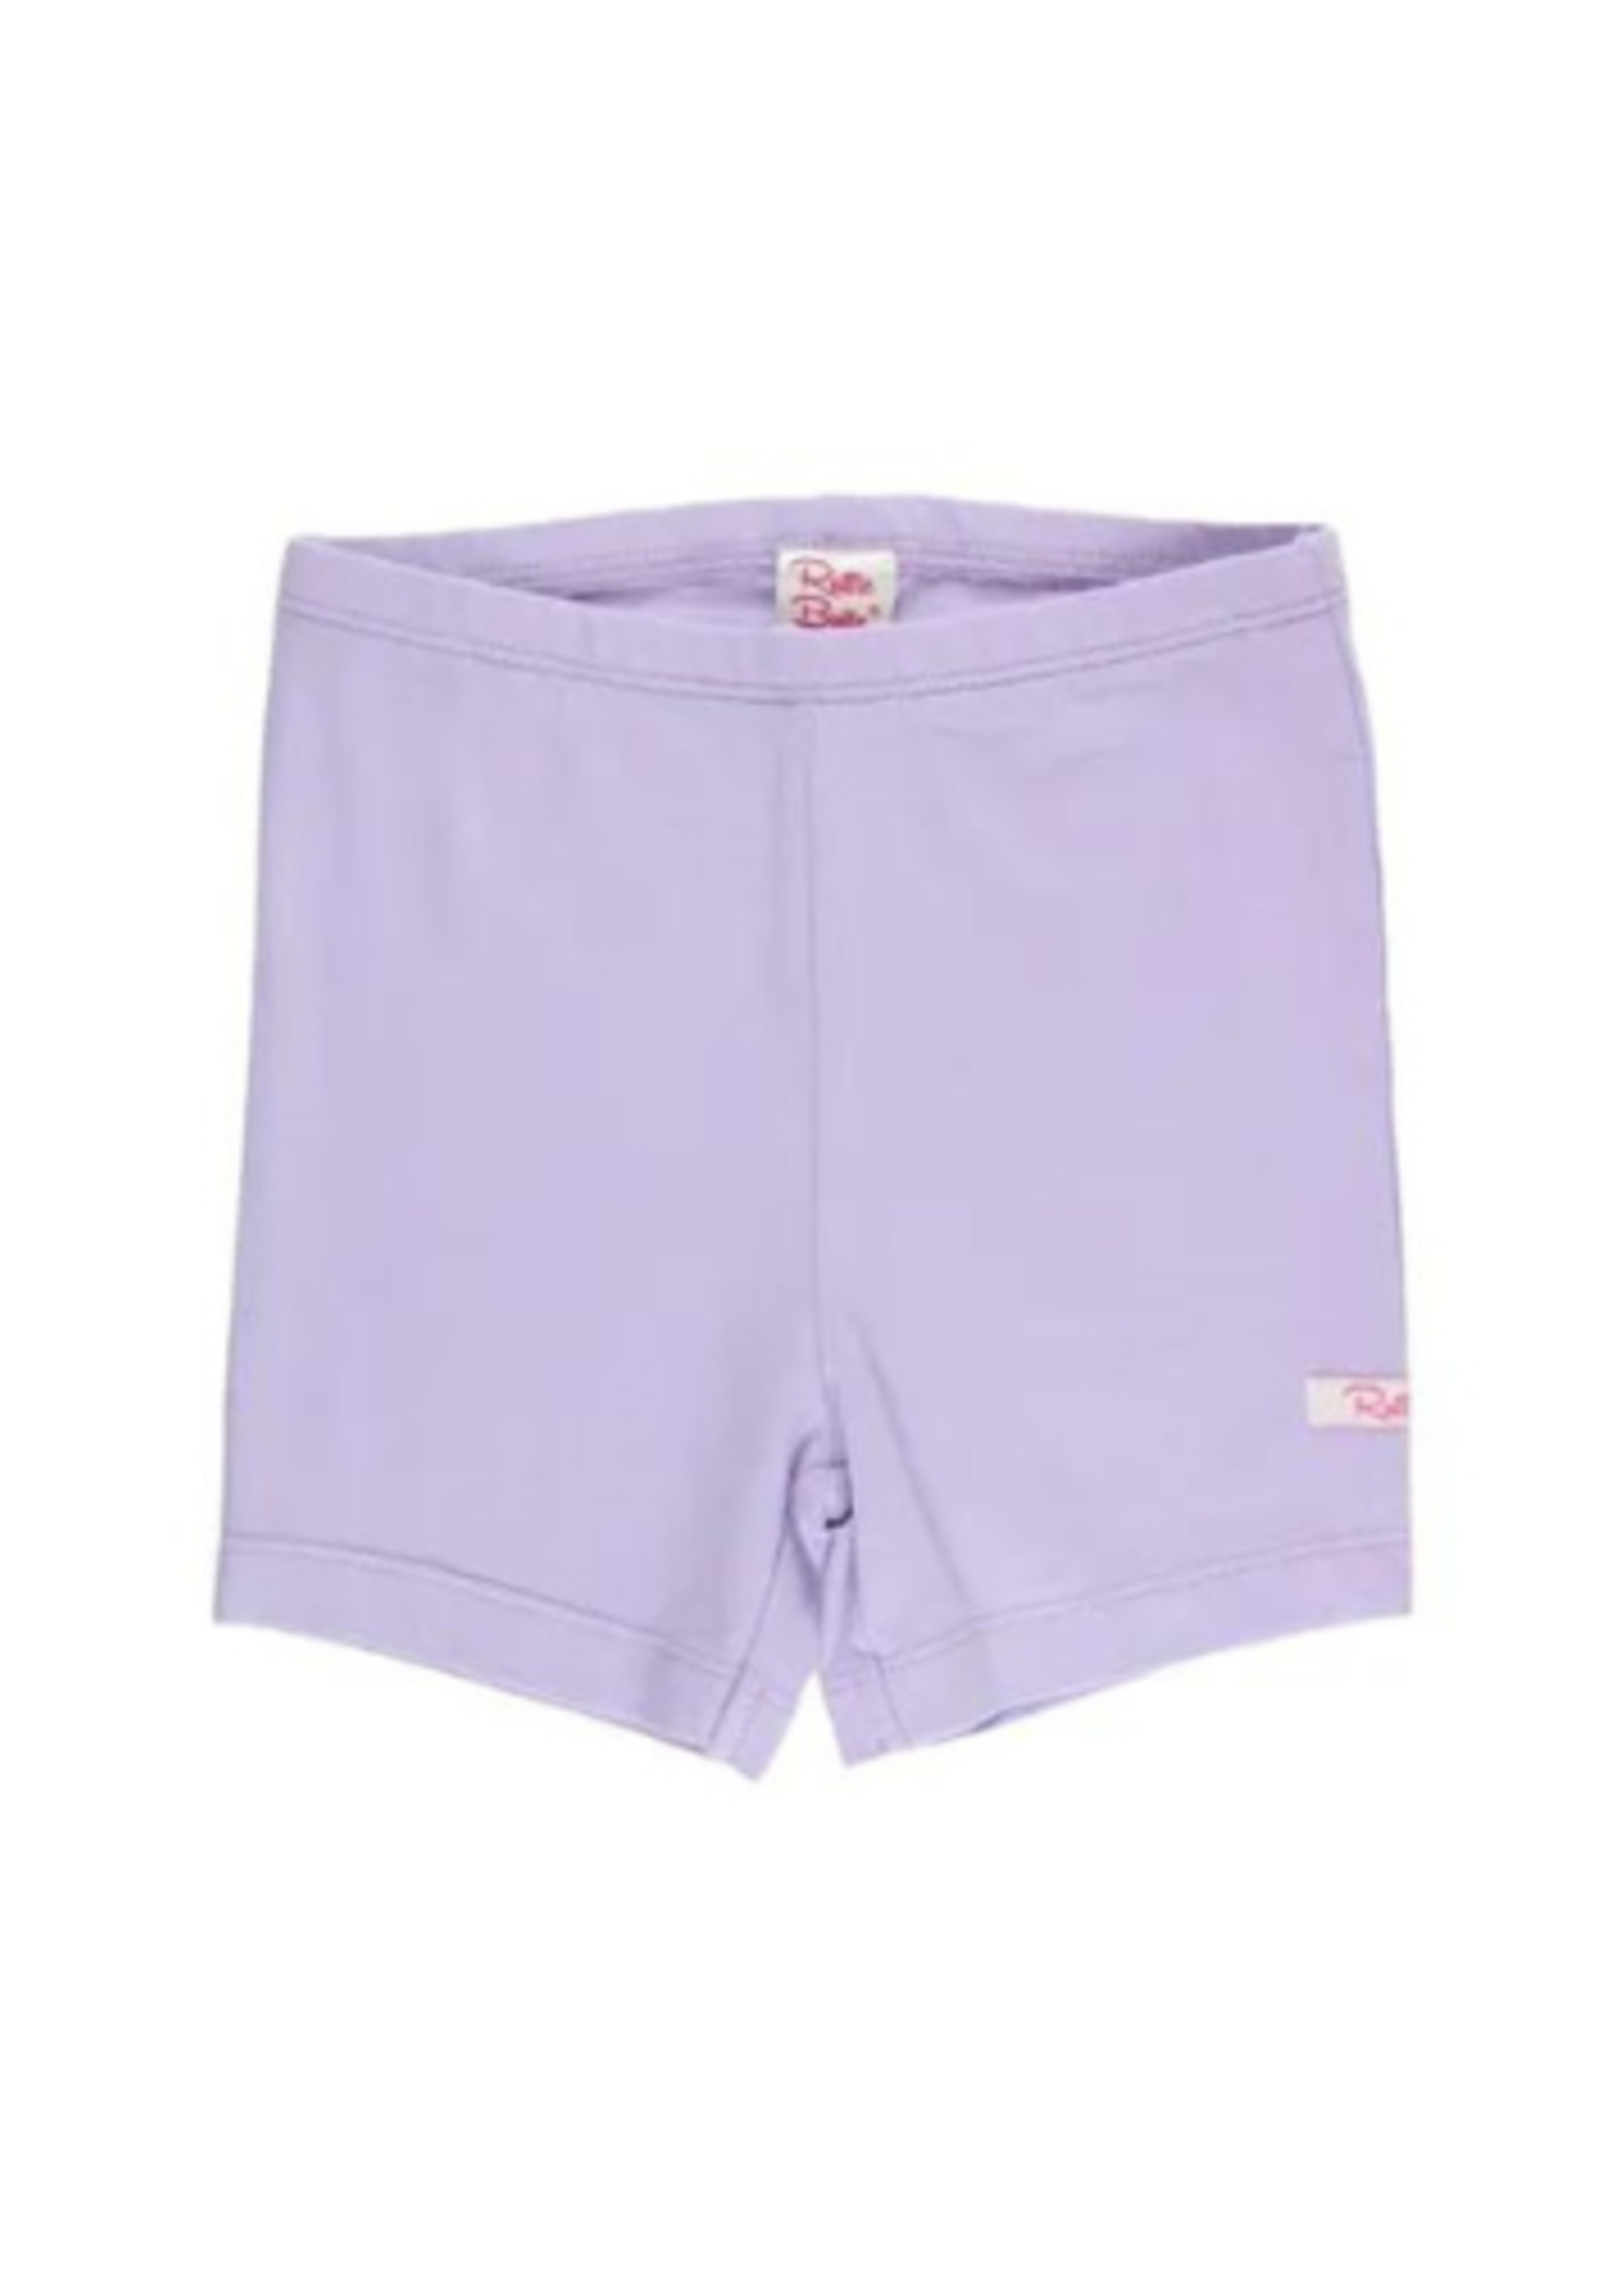 Rugged Butts Knit Playground Shorts